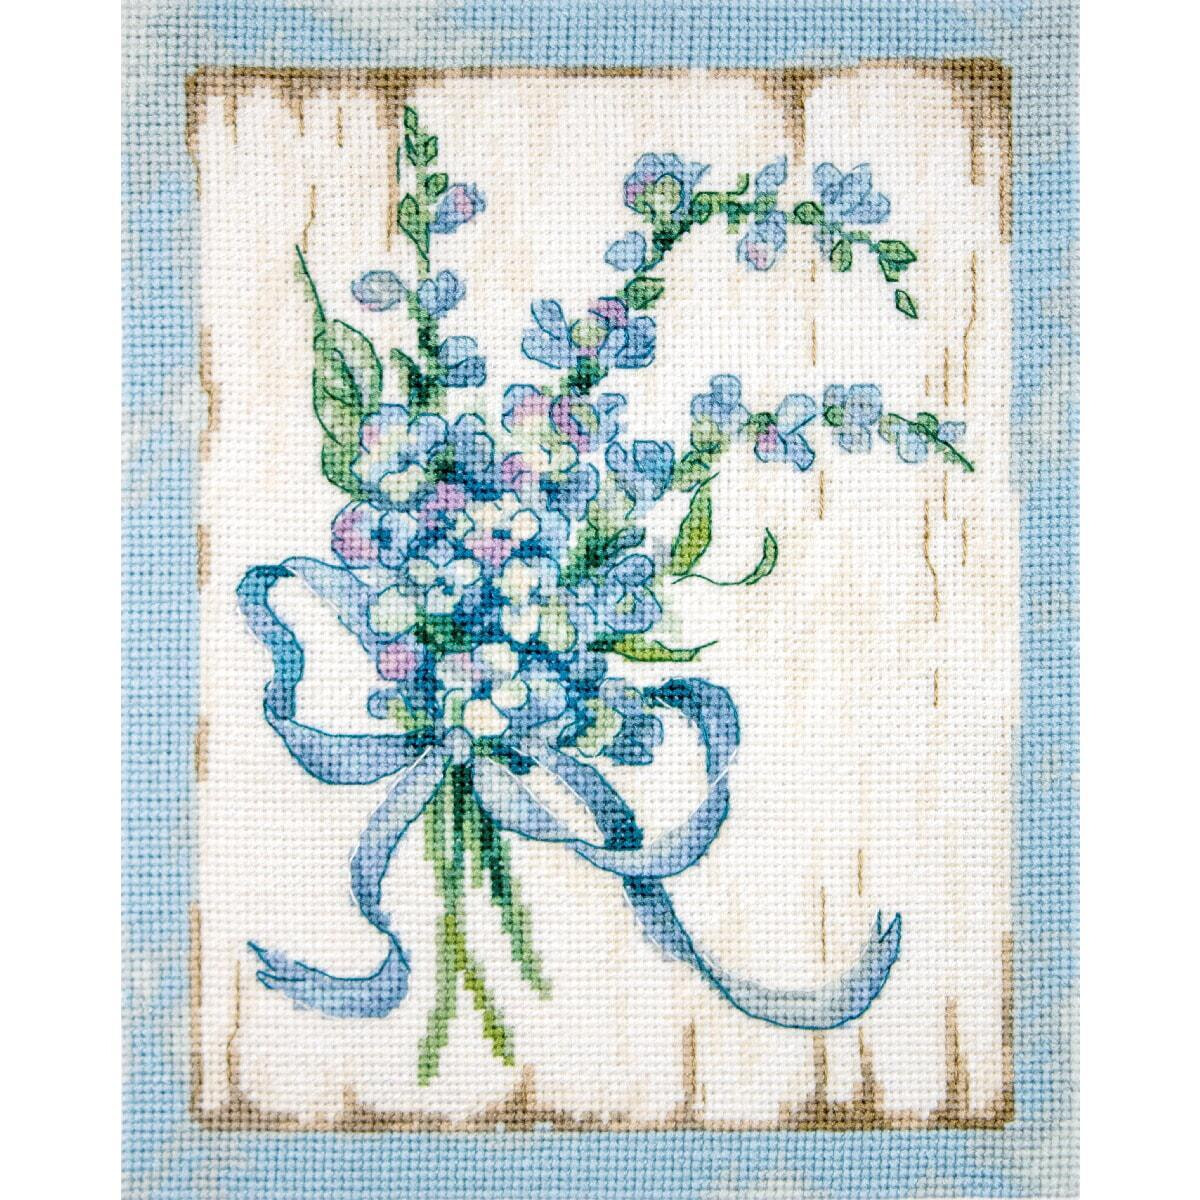 Letistitch counted cross stitch kit "BLUE I",...